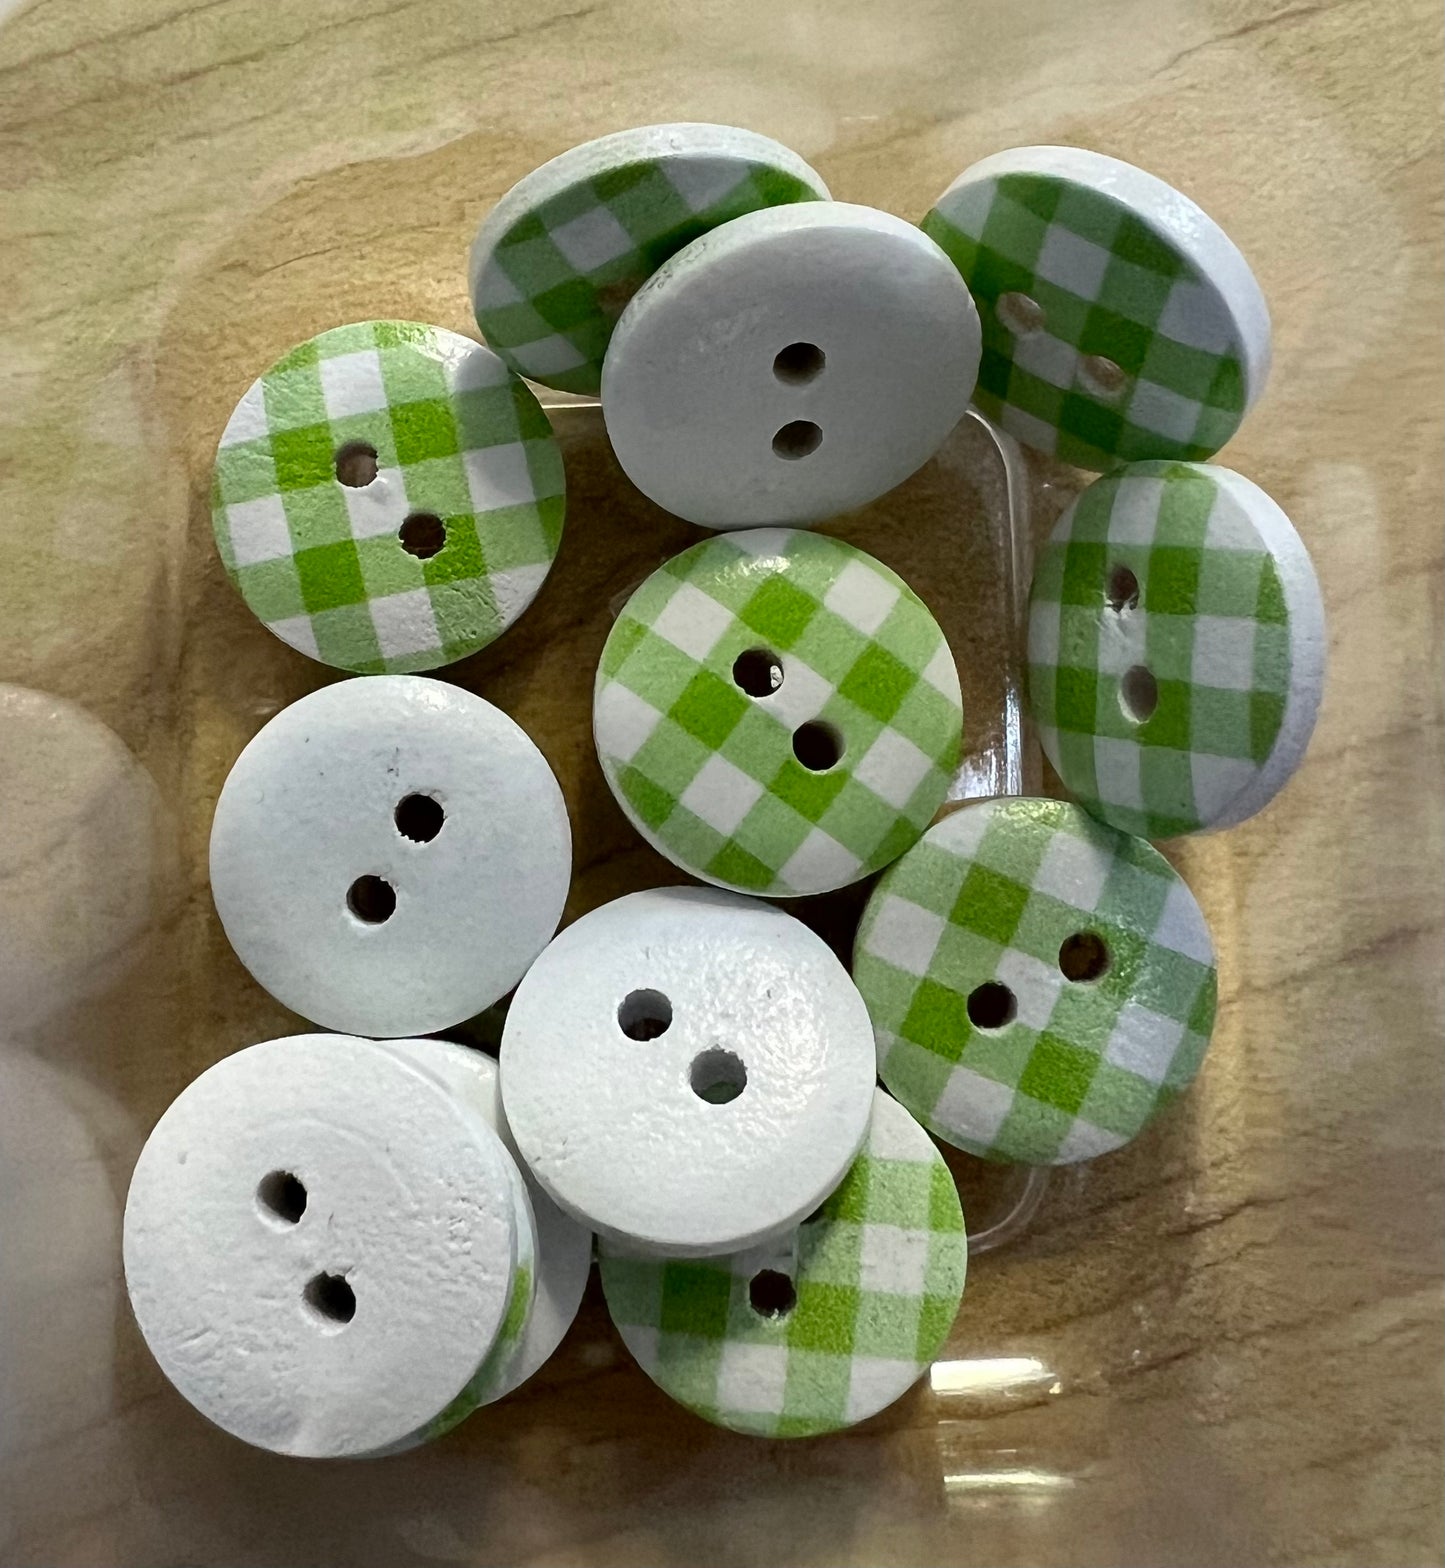 Green and White Cross buttons 1.5cm